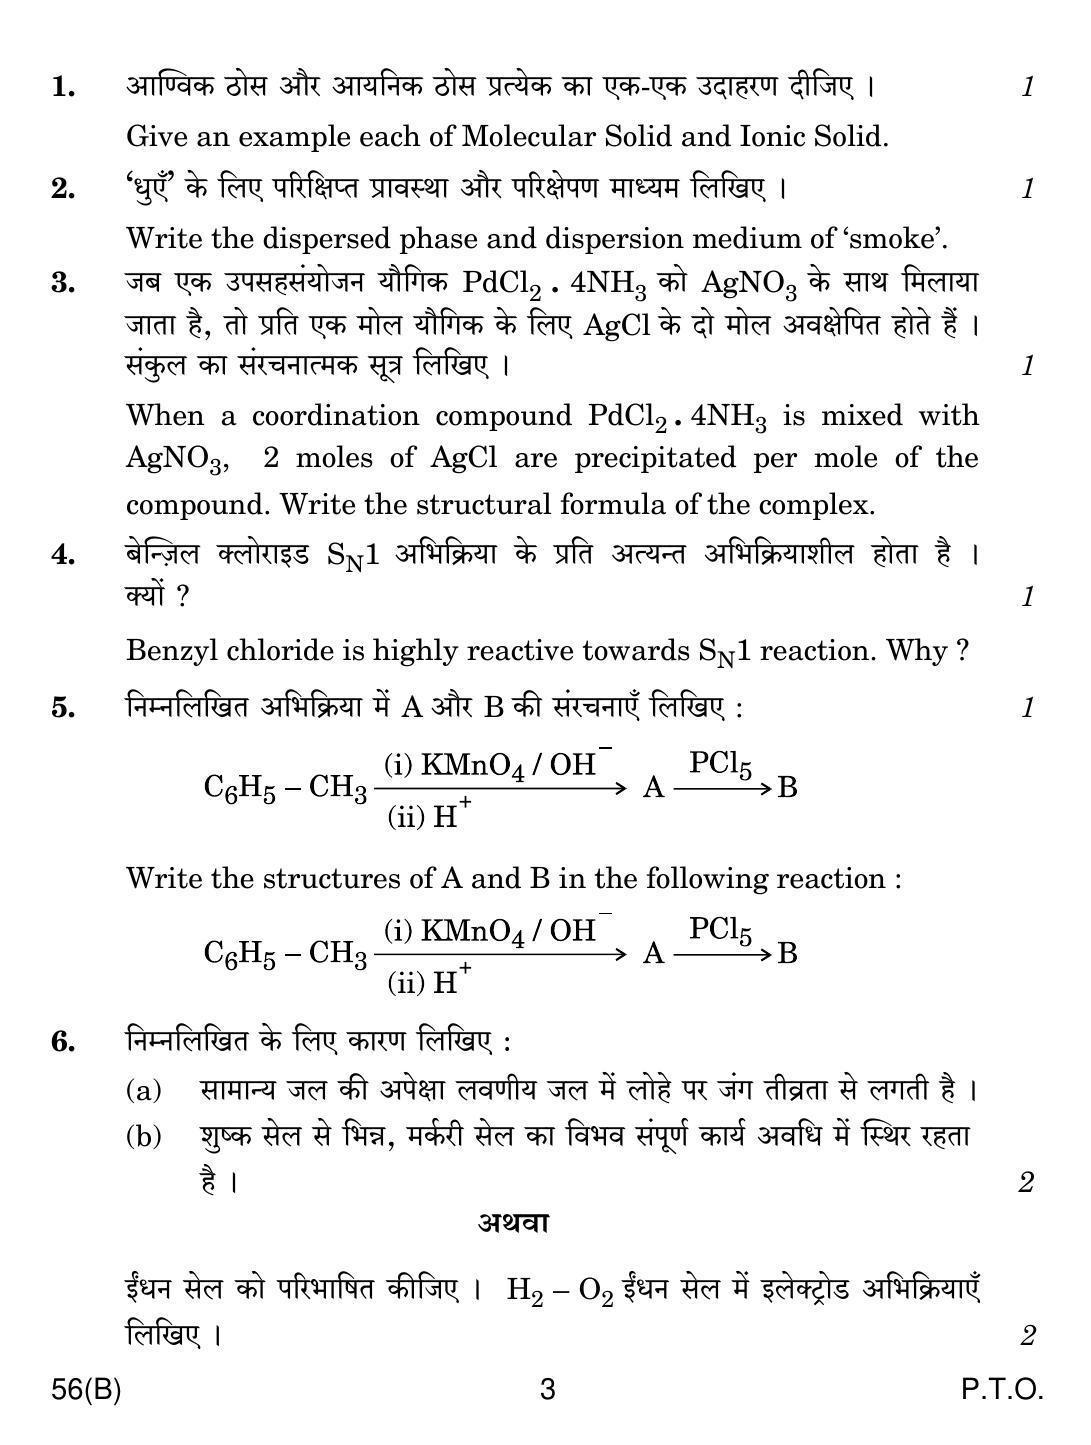 CBSE Class 12 56(B) CHEMISTRY FOR BLIND CANDIDATES 2018 Question Paper - Page 3